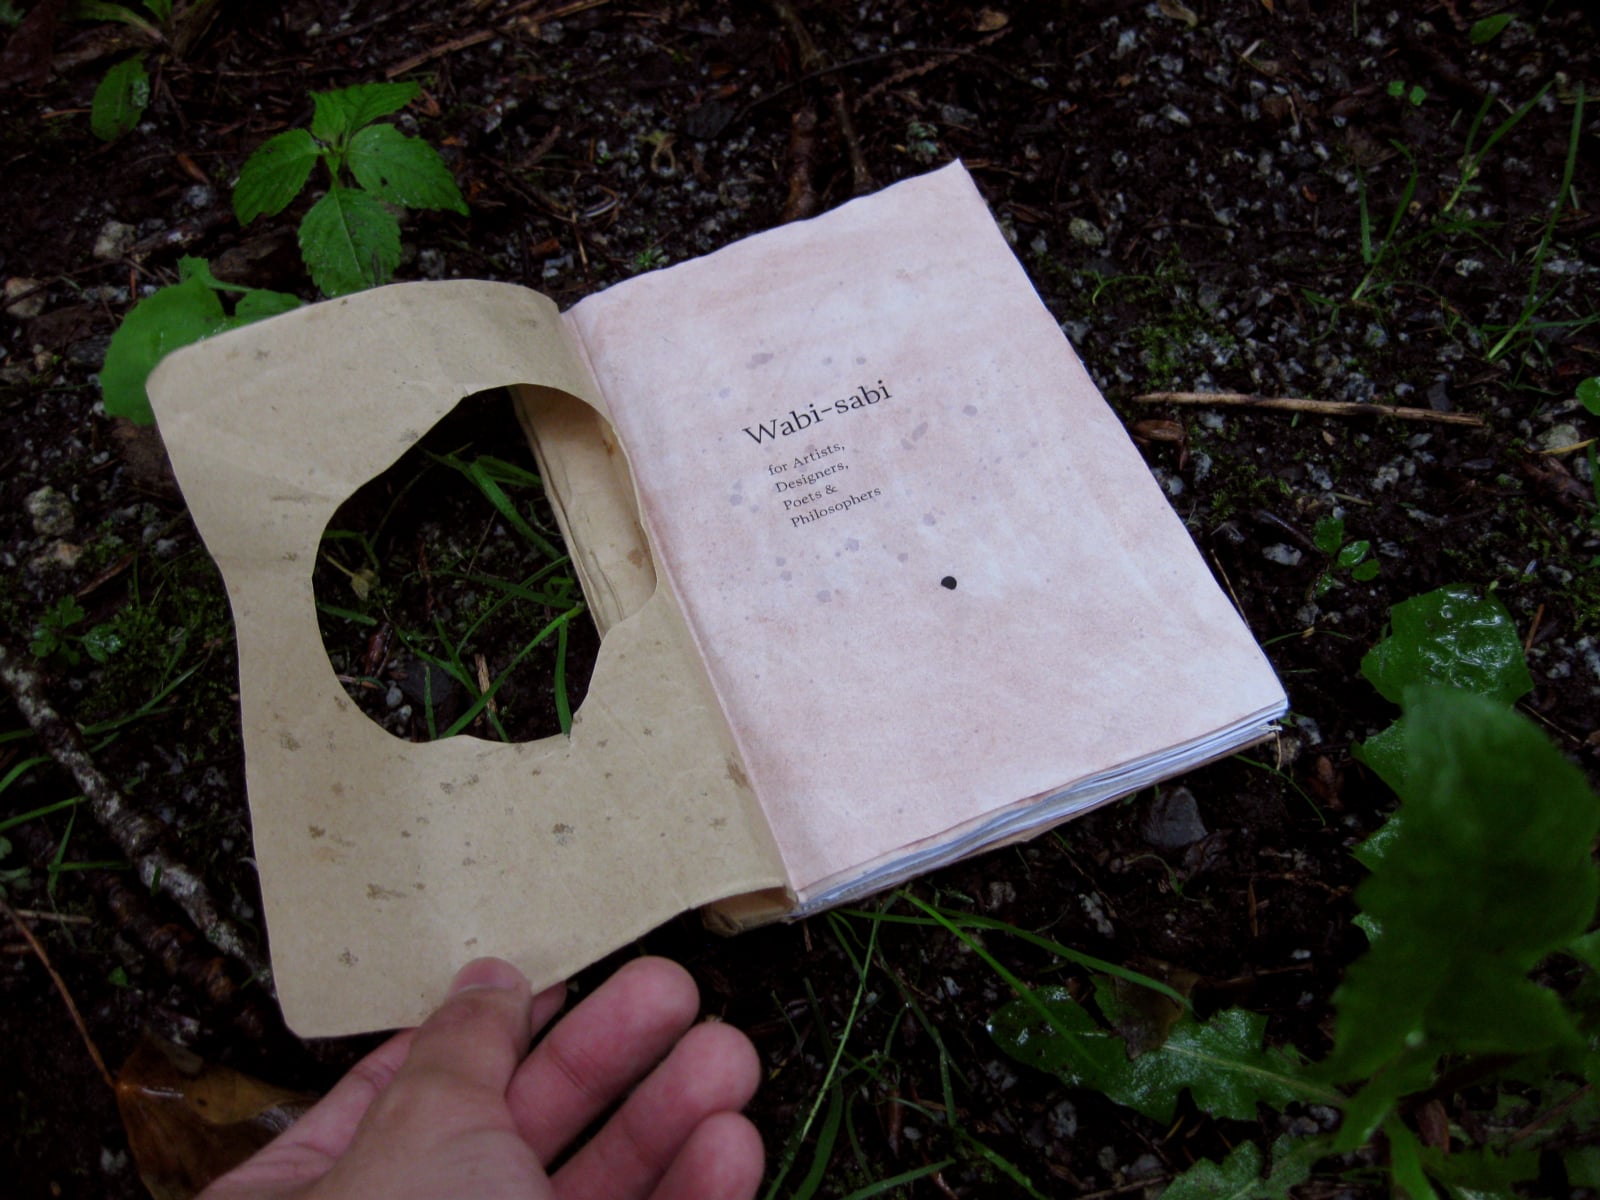 an open book on a wet forest floor. The first page is shown which shows the book title.